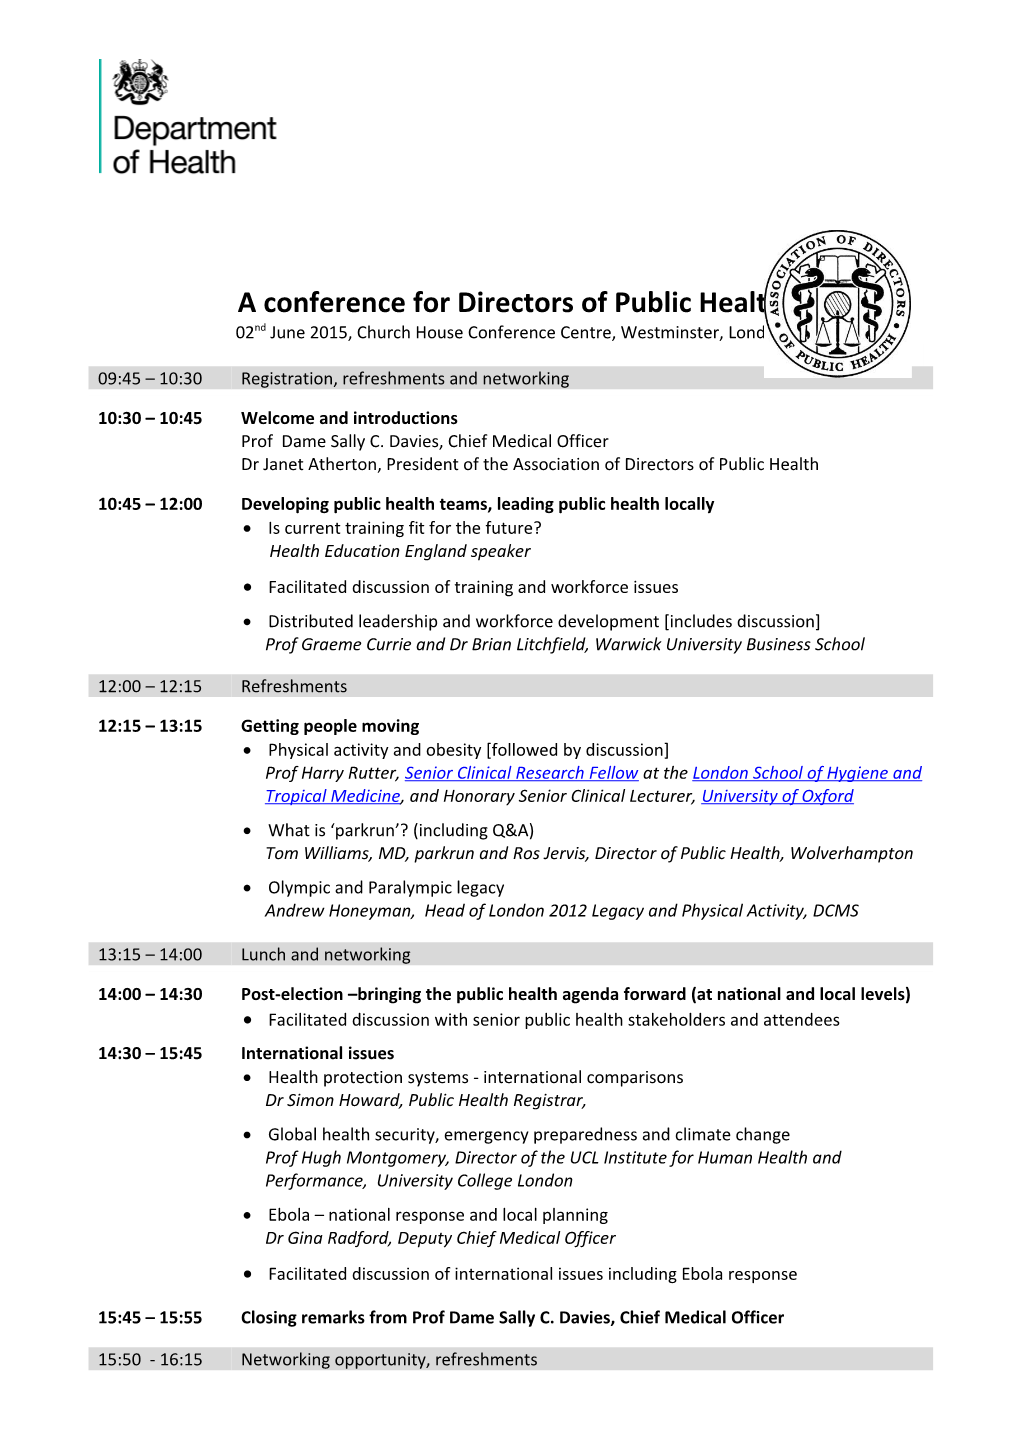 A Conference for Directors of Public Health